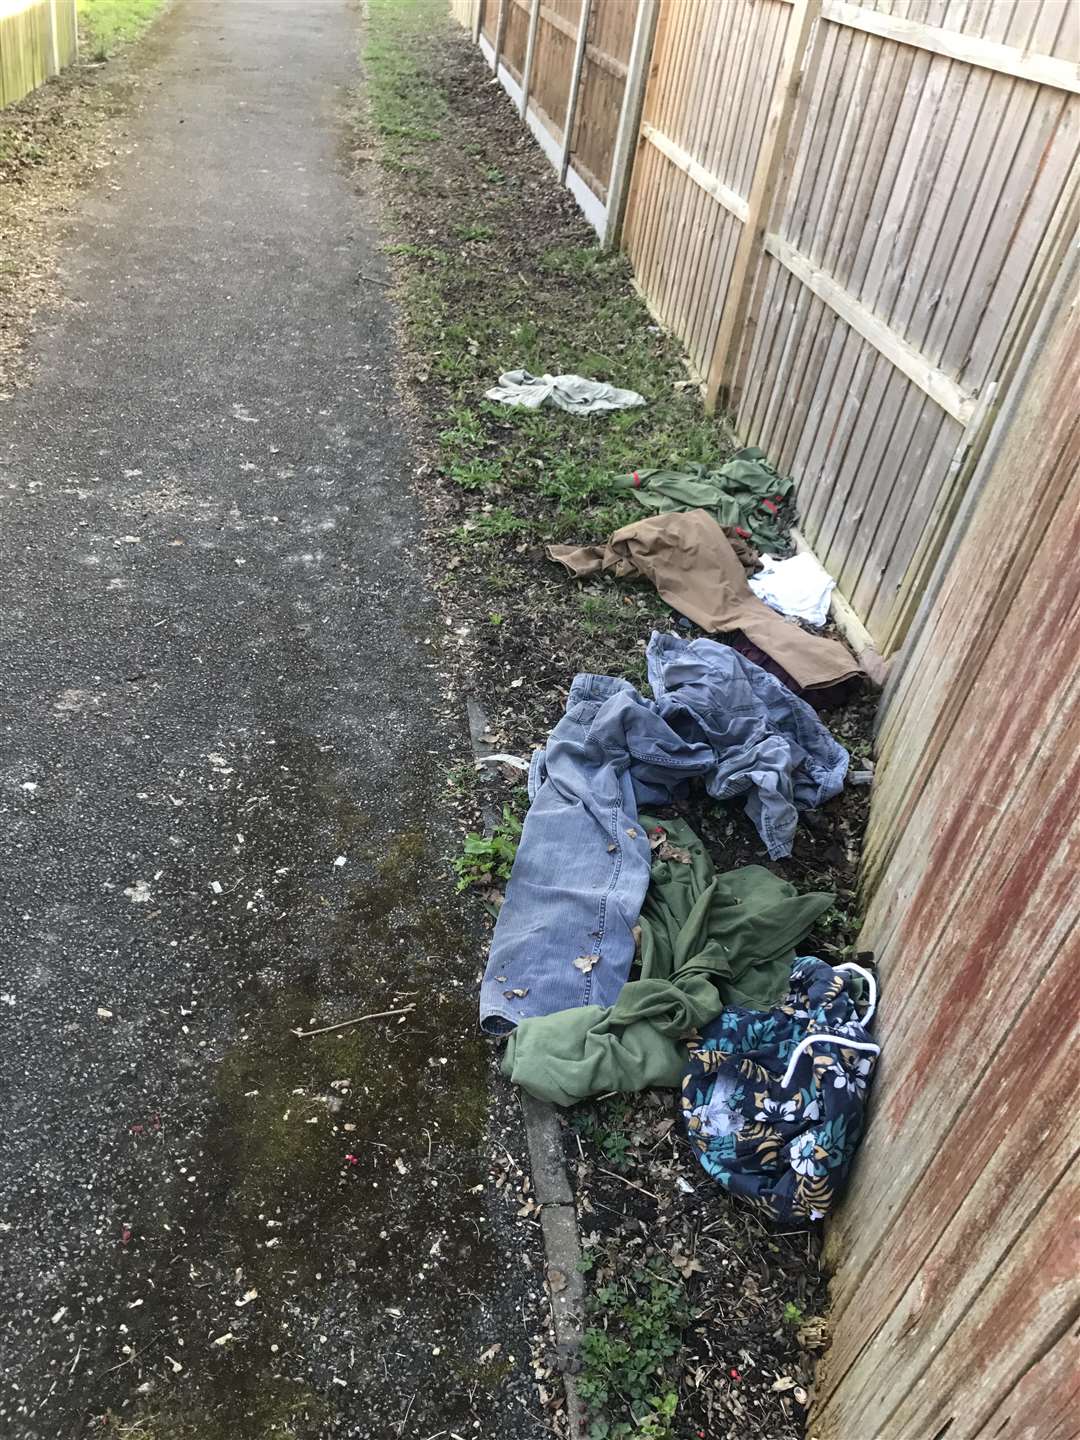 Clothes are often dumped along the path (1554201)